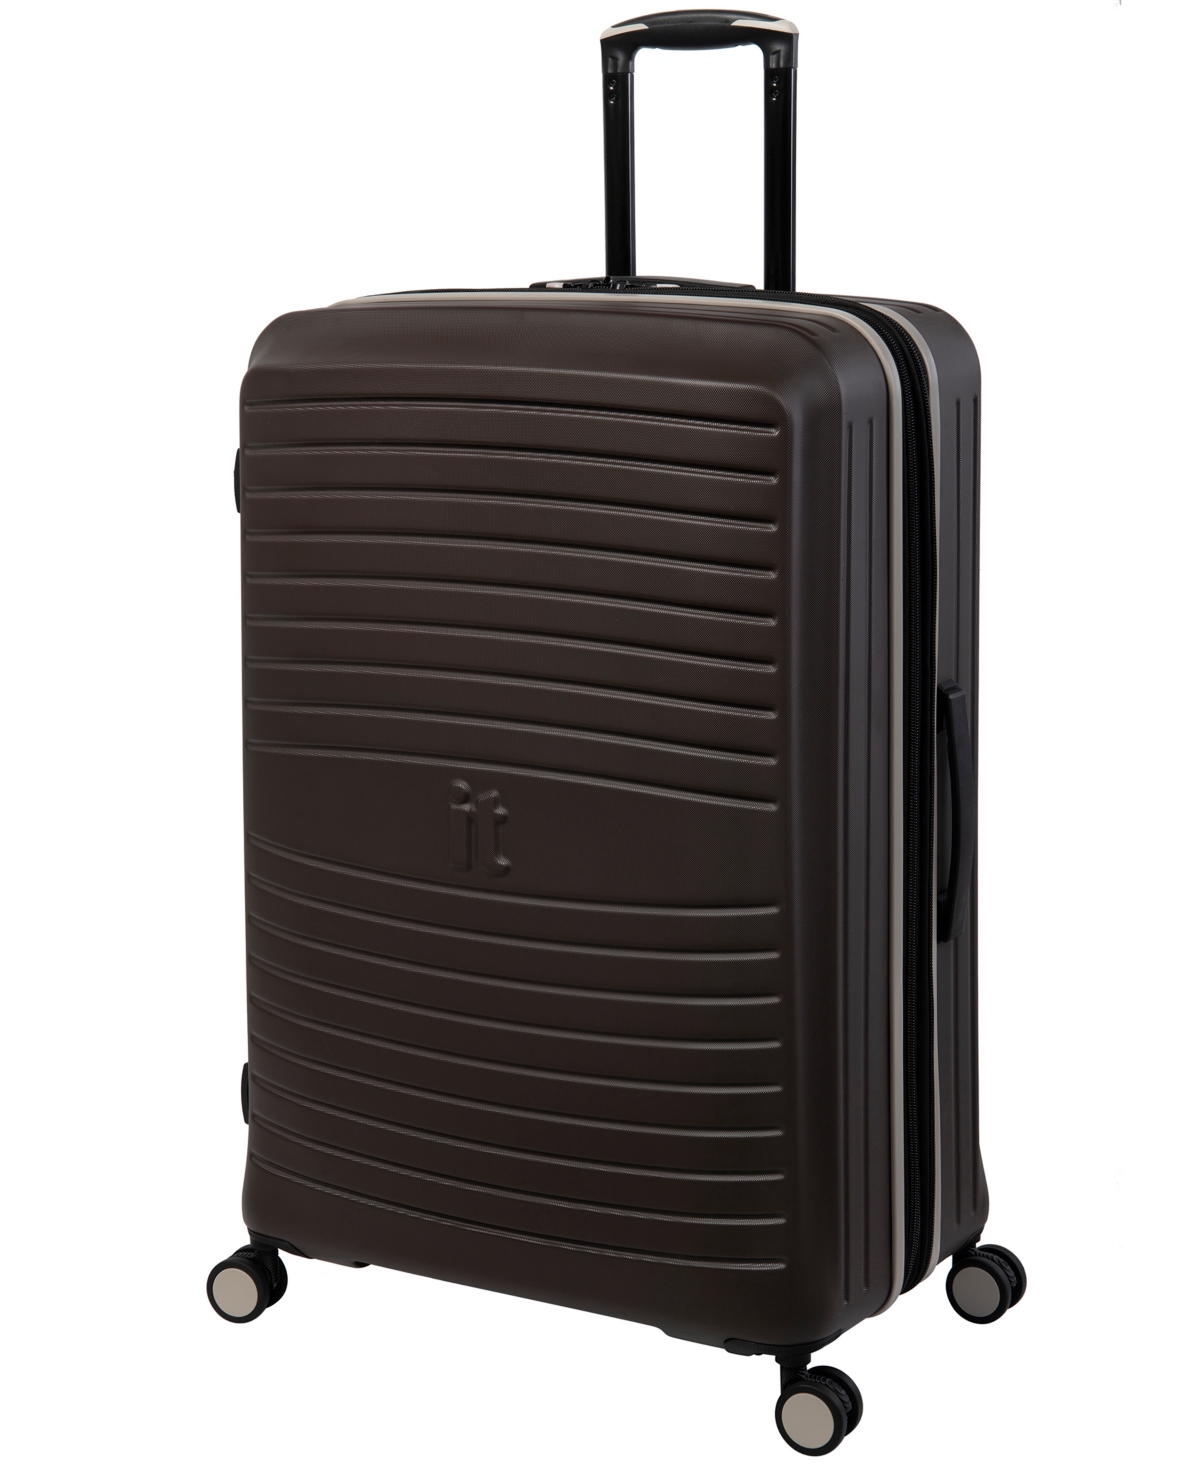 Shop It Luggage 25" Hardside 8-wheel Expandable Spinner Luggage In Coffee Bean